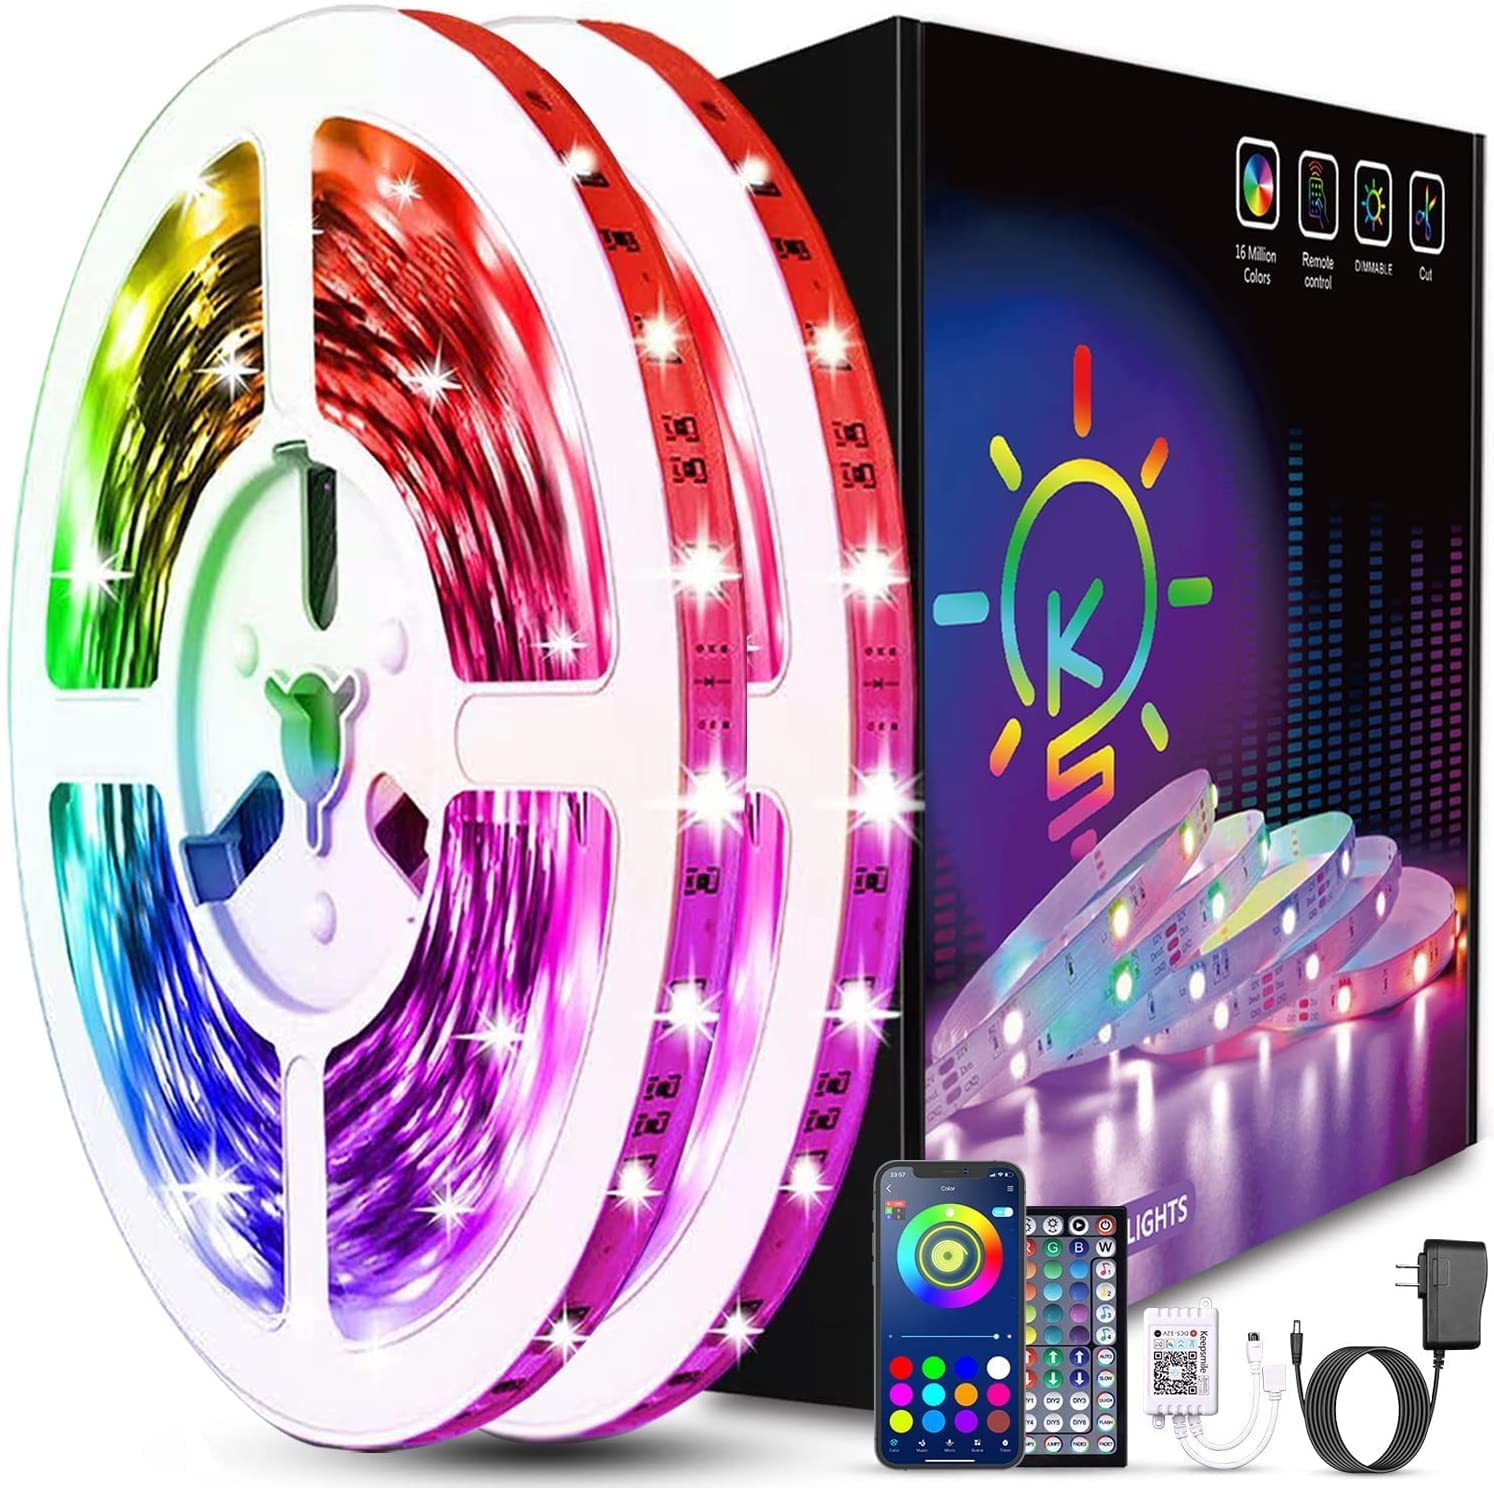 100ft Led Strip Lights for Bedroom KS Smart APP Music Sync 5050 RGB Color Changing Strip-Lights with DIY Remote for Home Decoration TV Parties and Fstivals